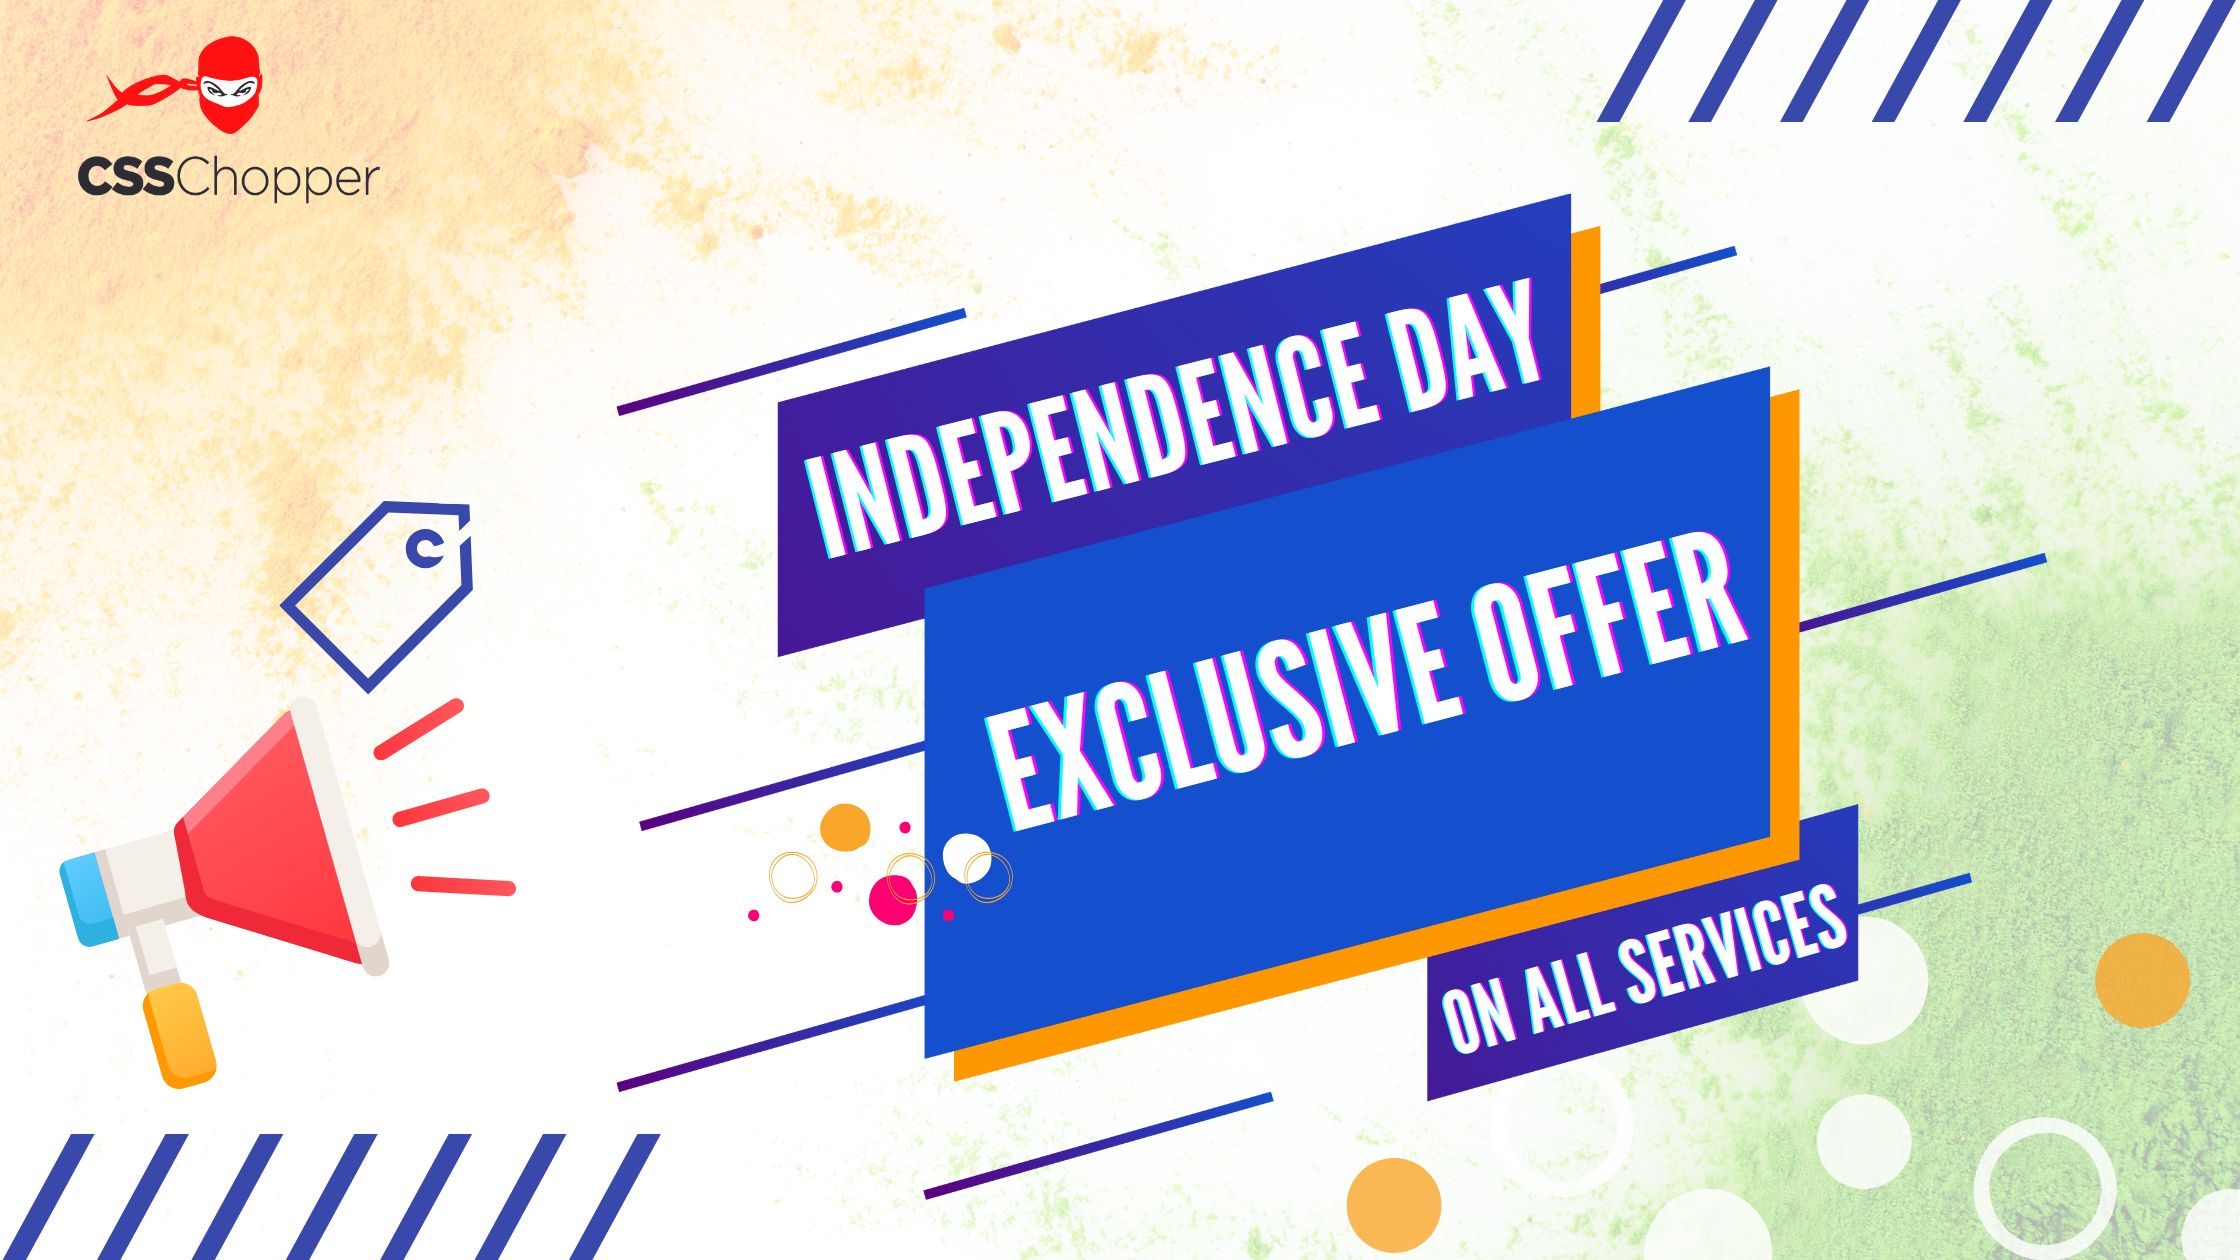 CSSChopper Offers Exclusive Independence Day Discounts On Its Services (1)